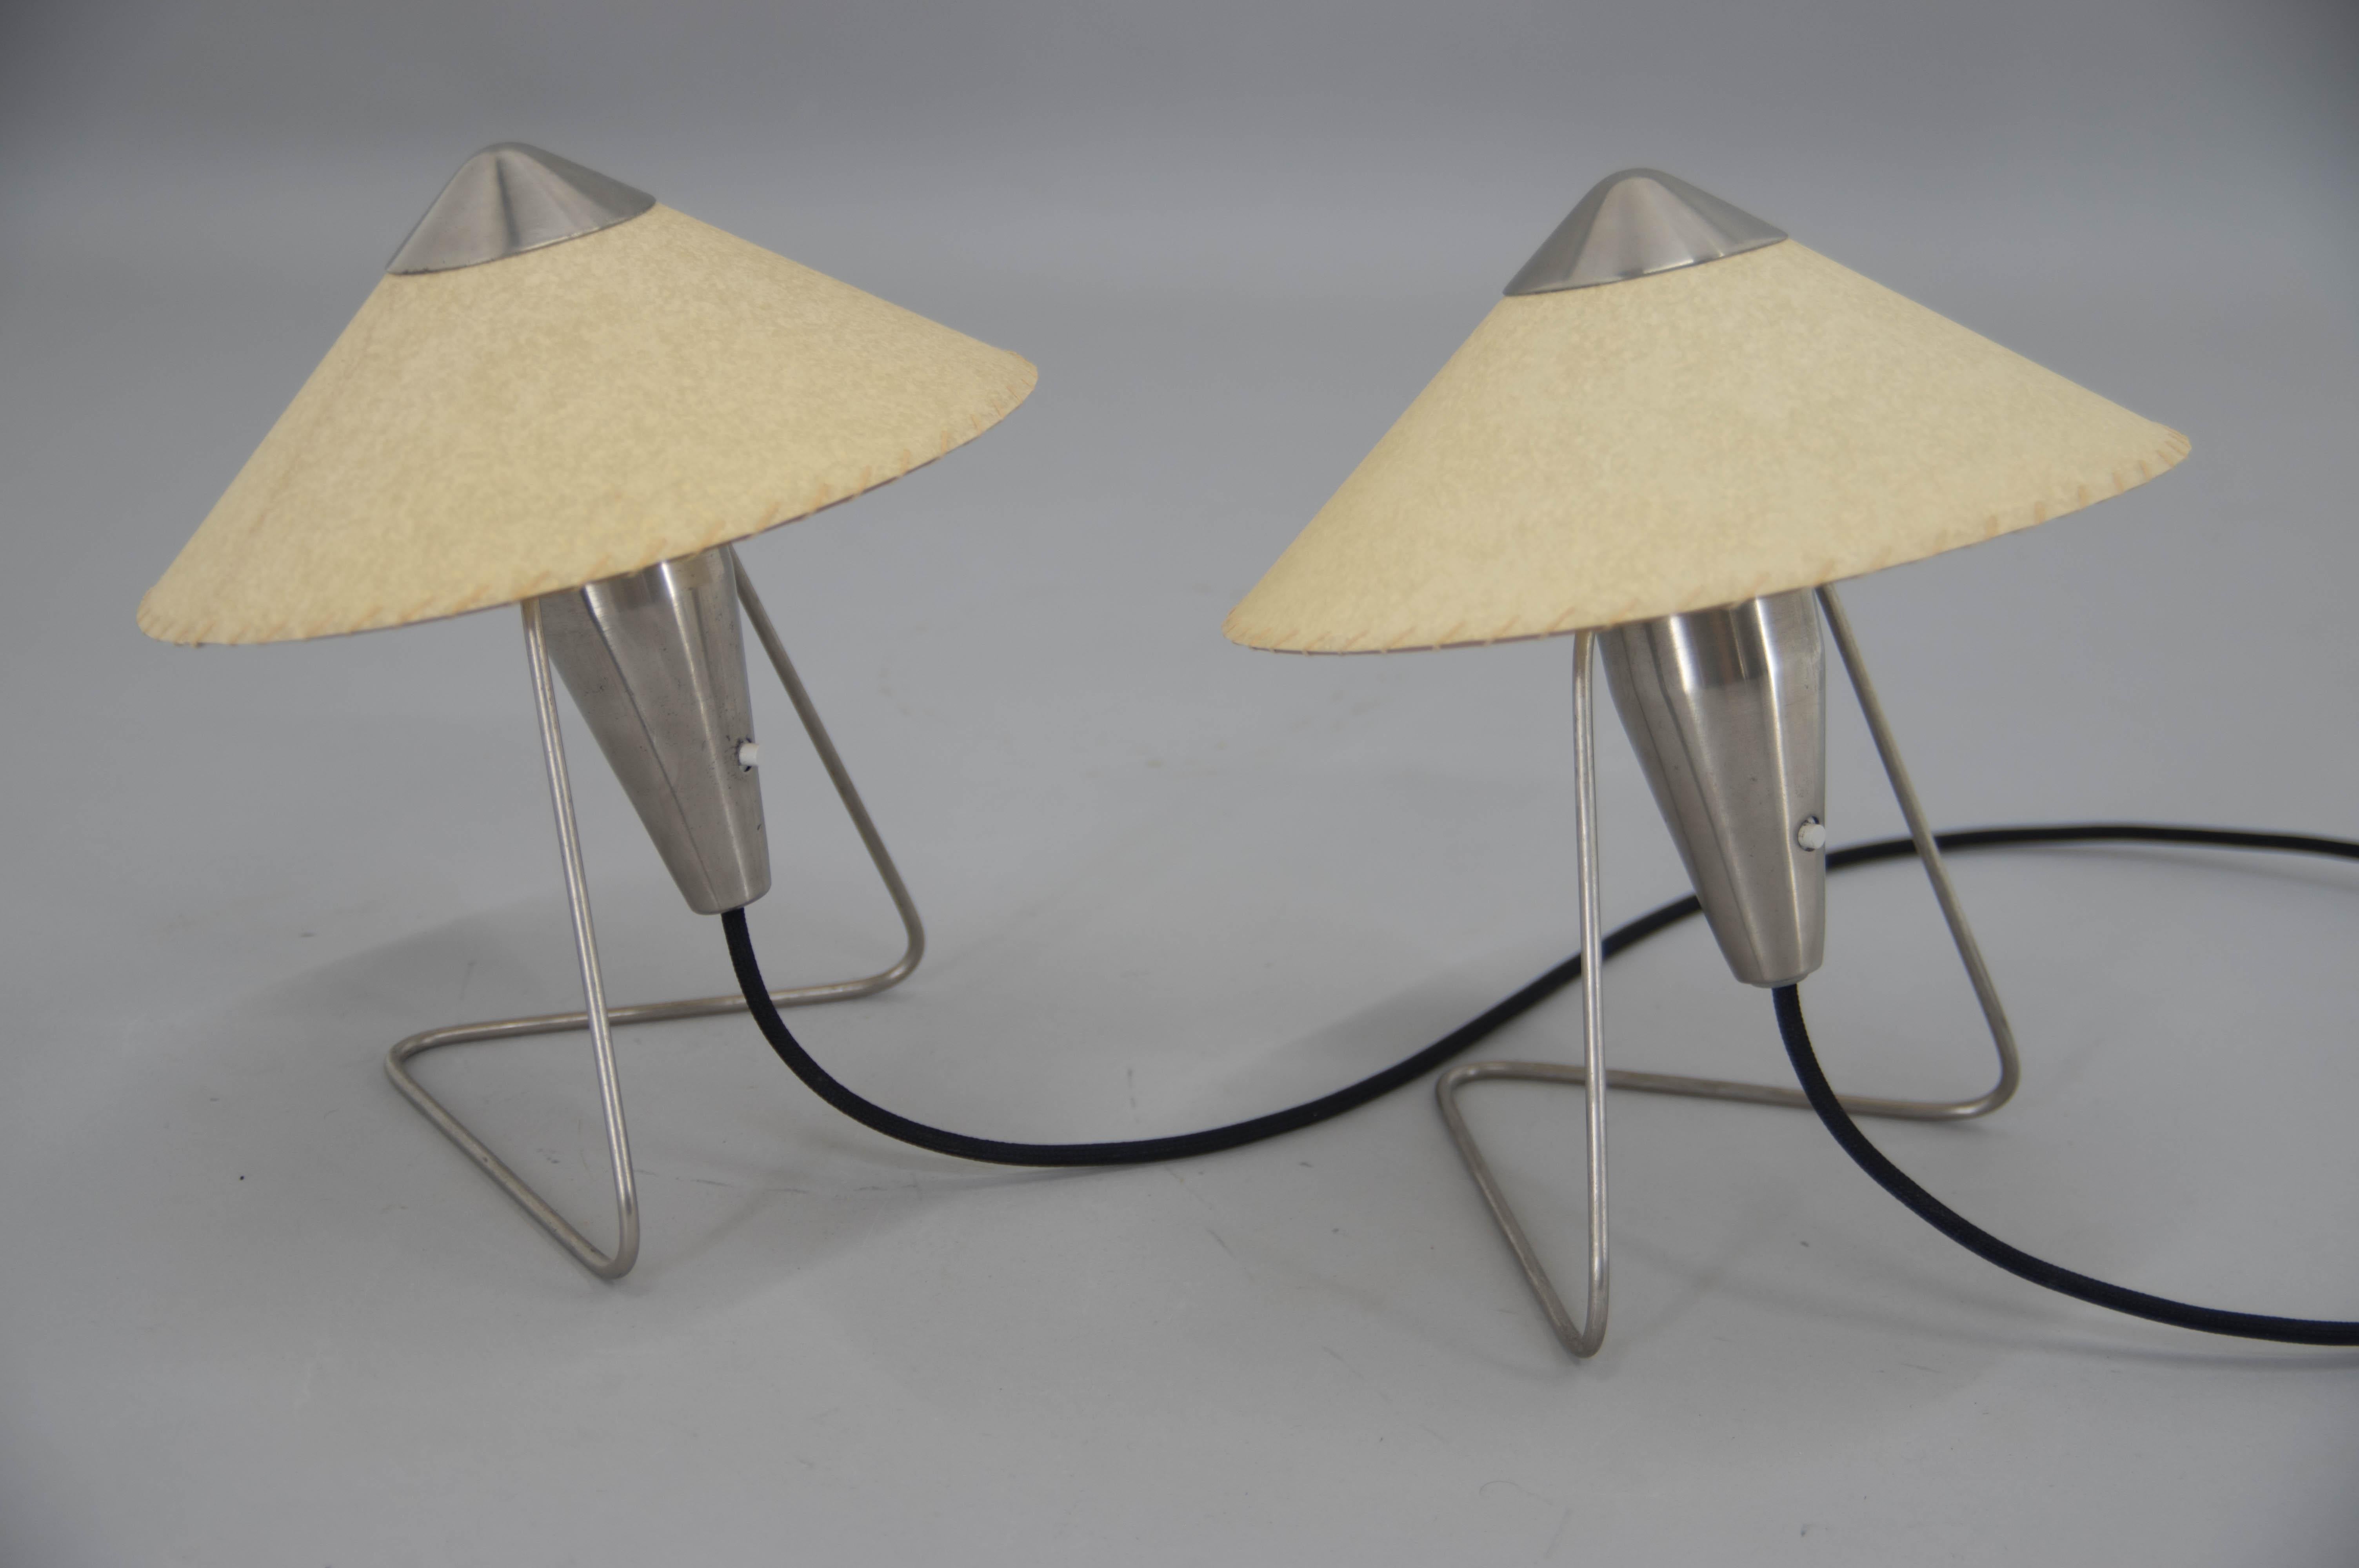 Parchment Paper Set of Two Table or Wall Lamps by Frantova for OKOLO, Czechoslovakia, 1950s